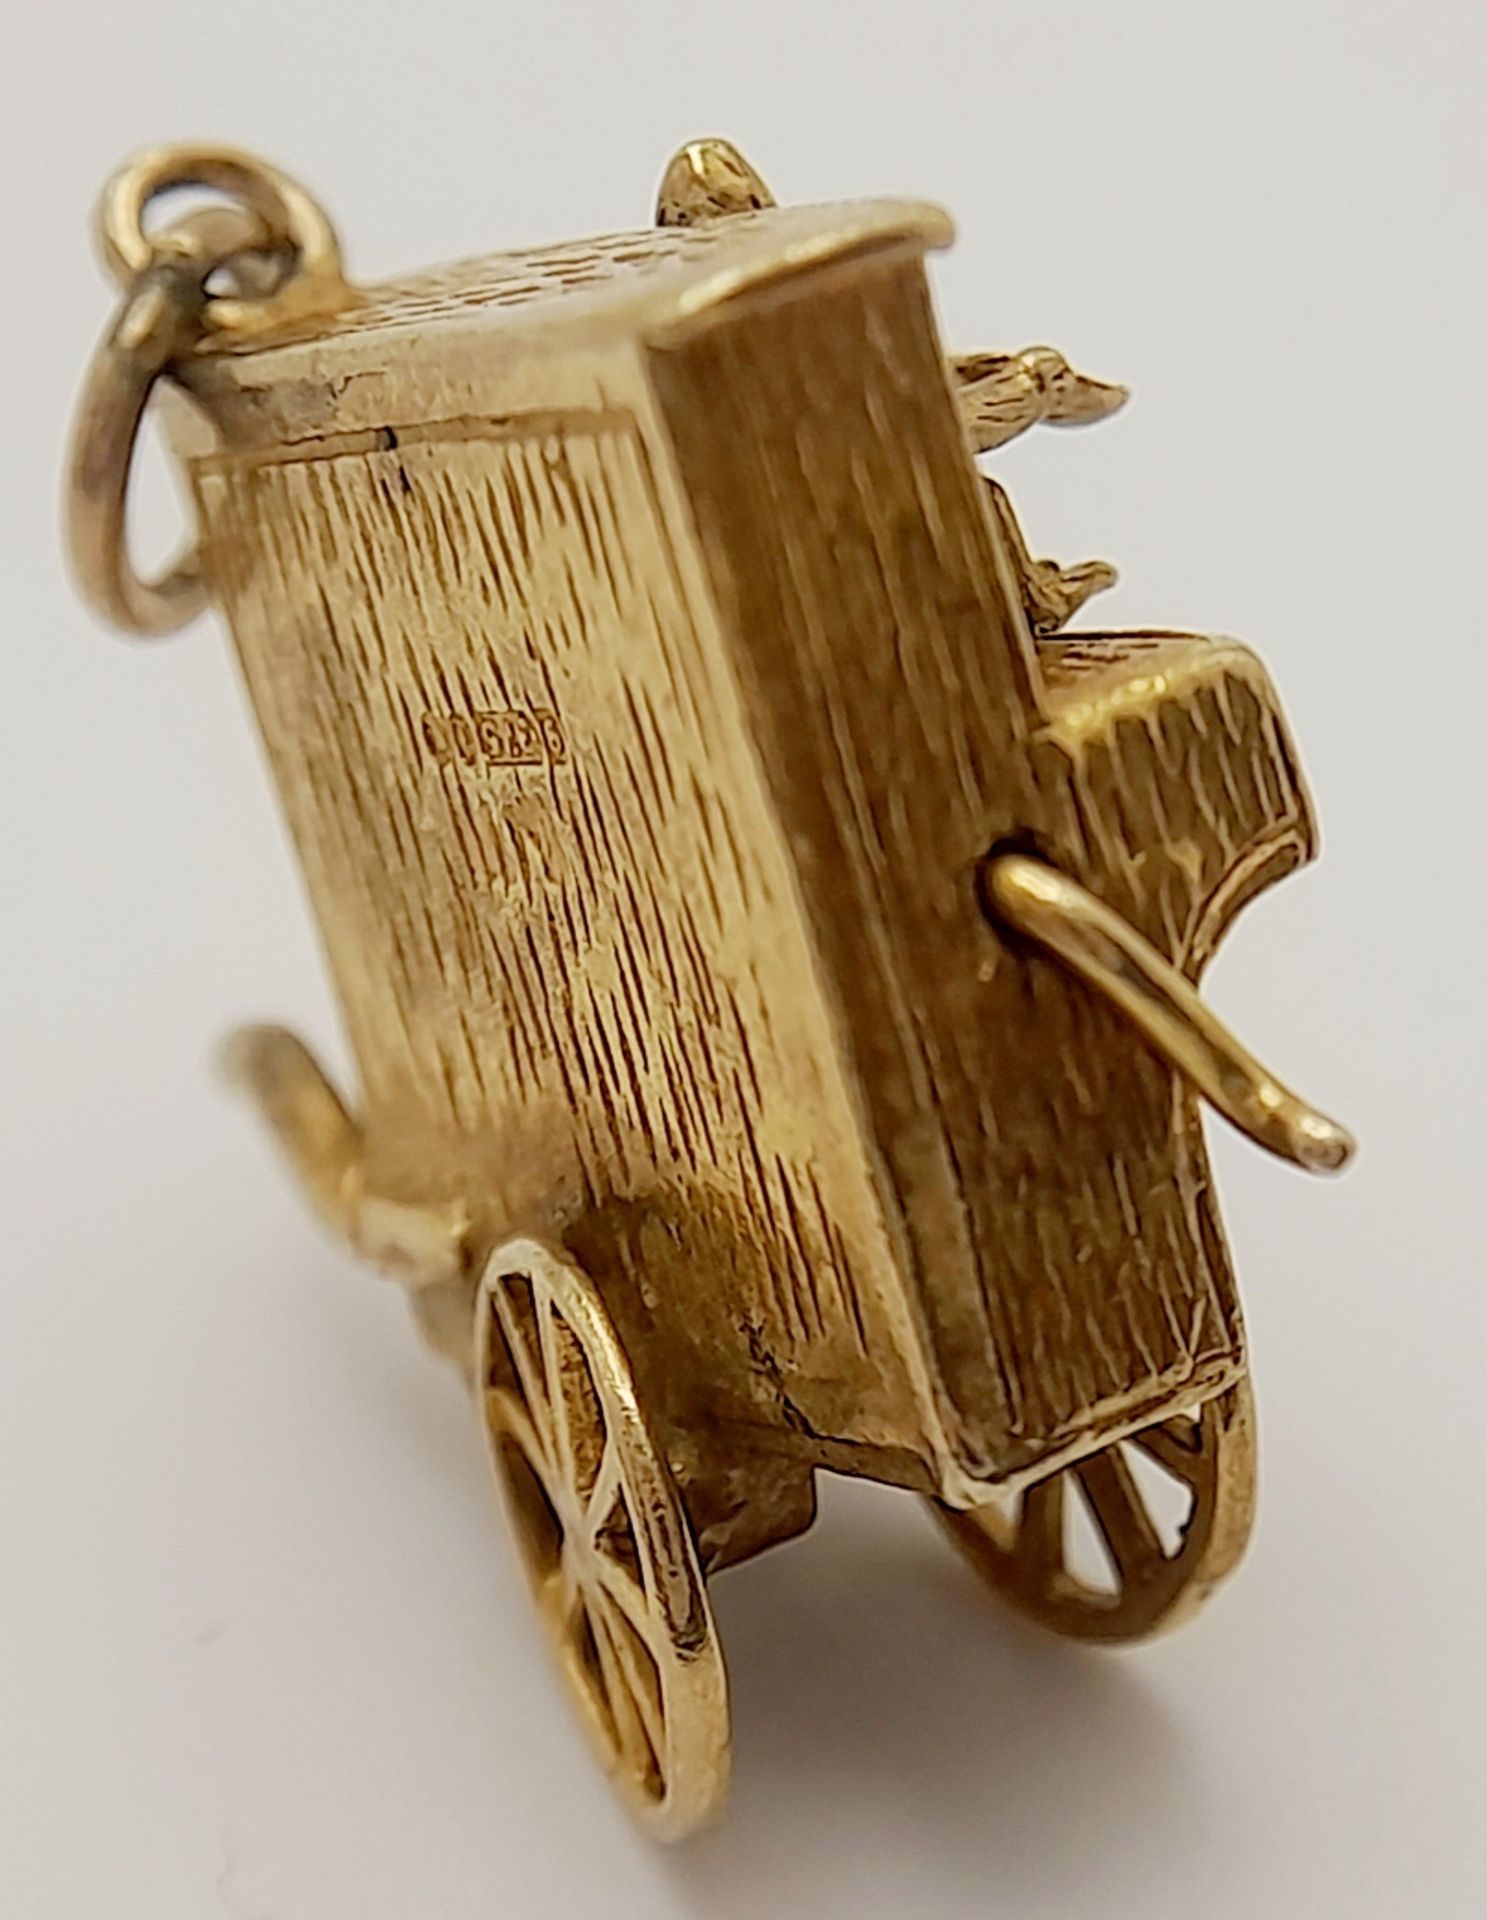 A 9K YELLOW GOLD ORGAN GRINDER AND MONKEY CHARM WITH MOVING PARTS. 2.2cm x 2.5cm, 5.2g weight. - Image 4 of 6